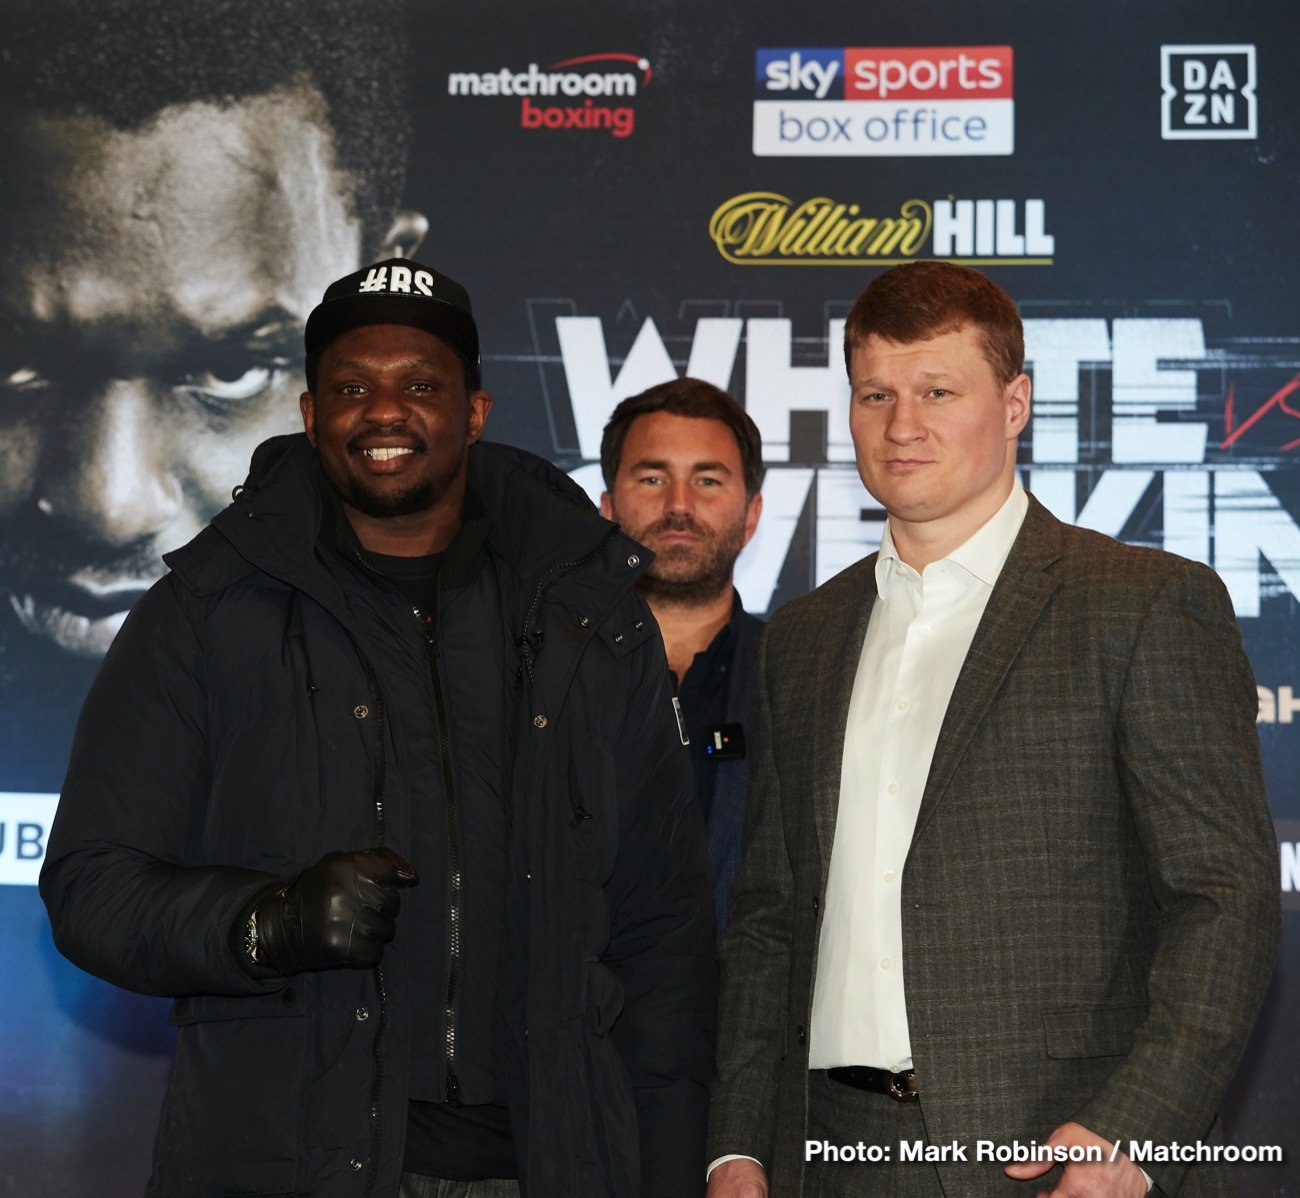 Image: Dillian Whyte will win a world title says Peter Fury